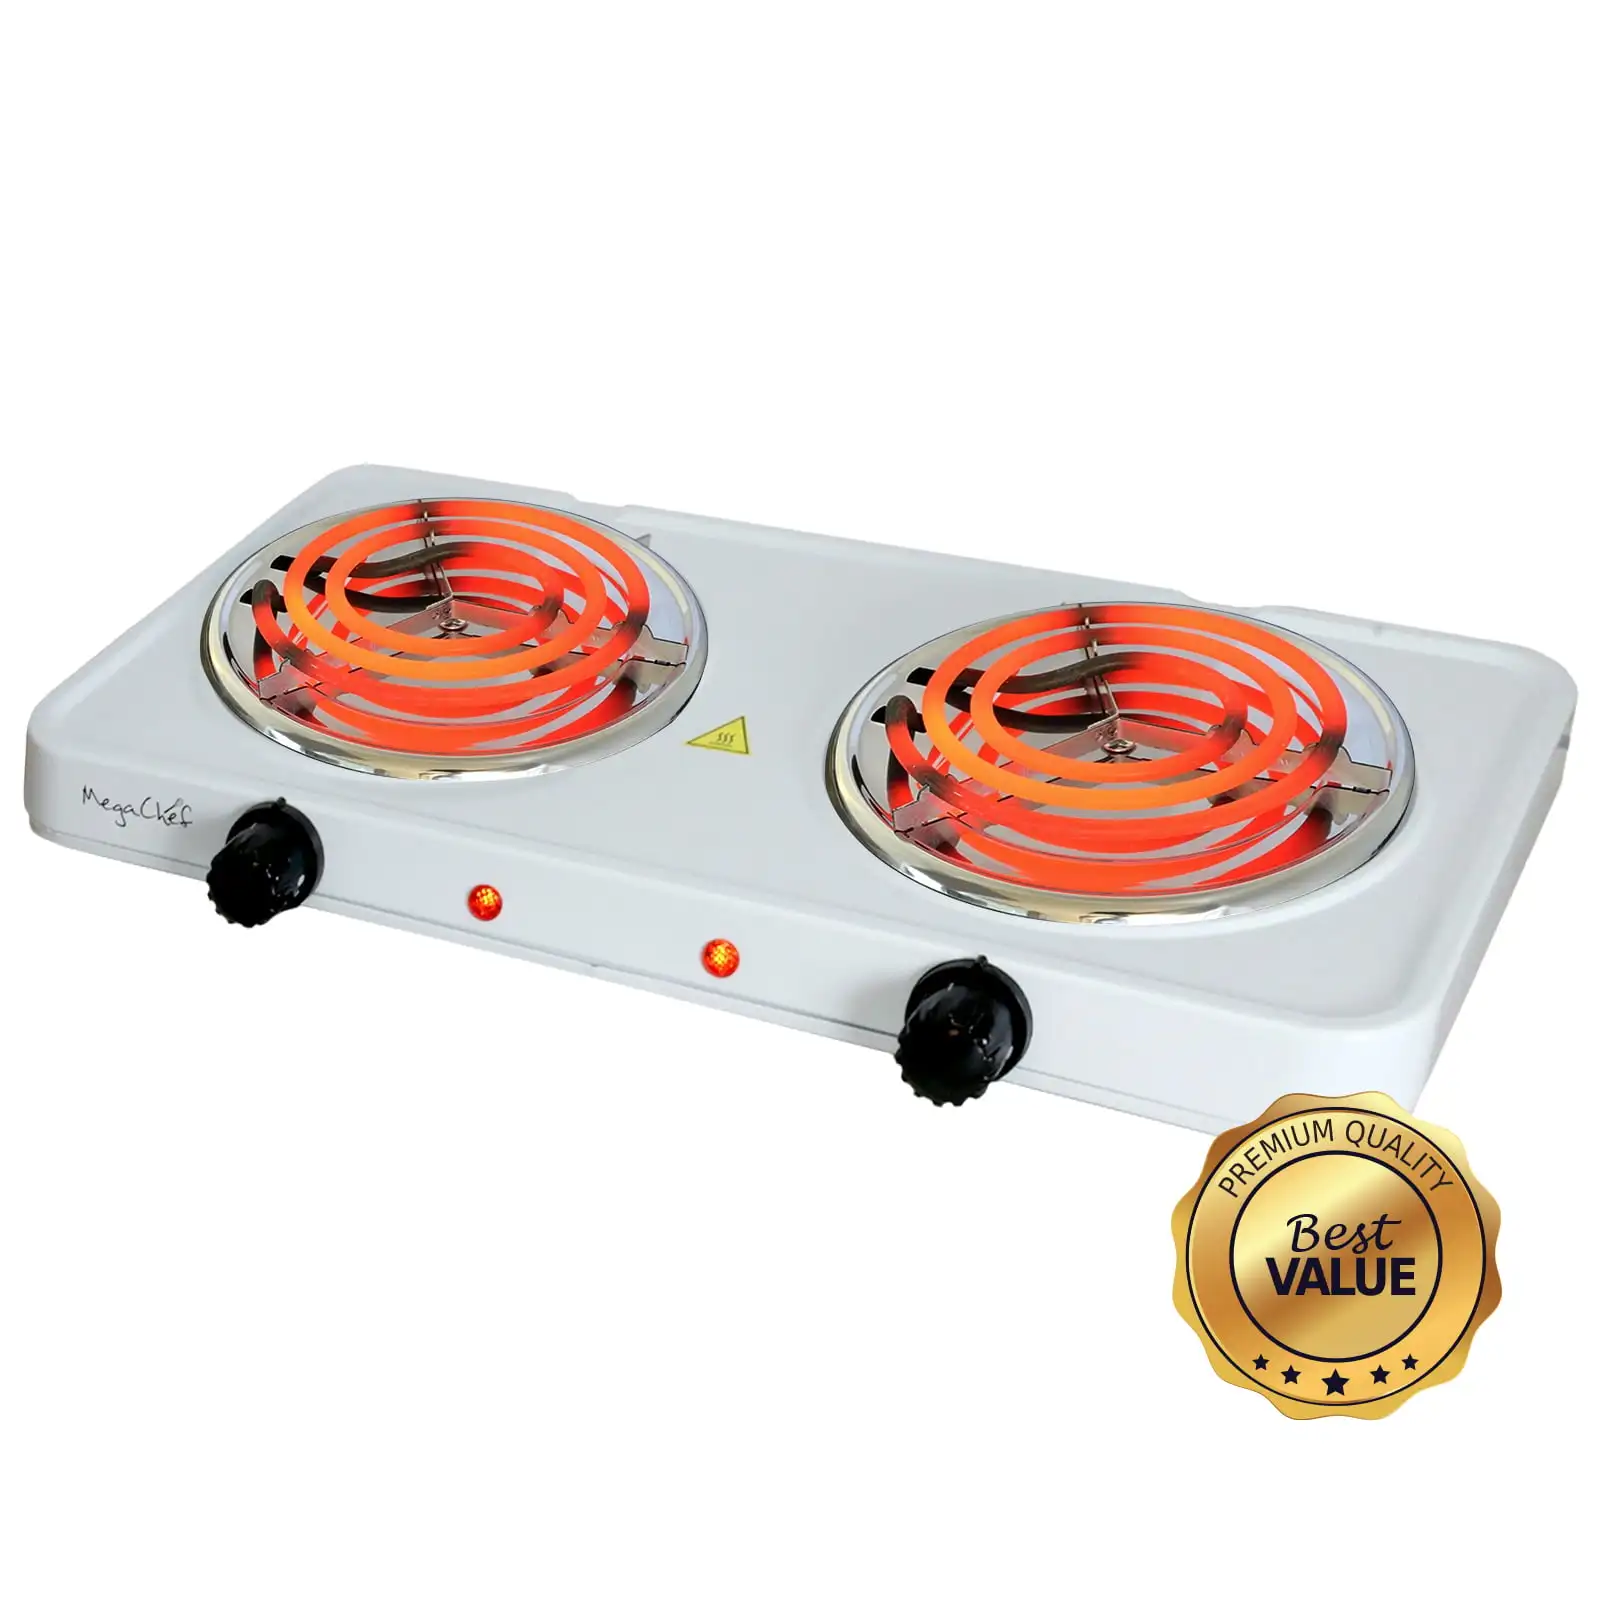 Easily Portable Ultra Lightweight Dual Coil Burner Cooktop Buffet Range in White